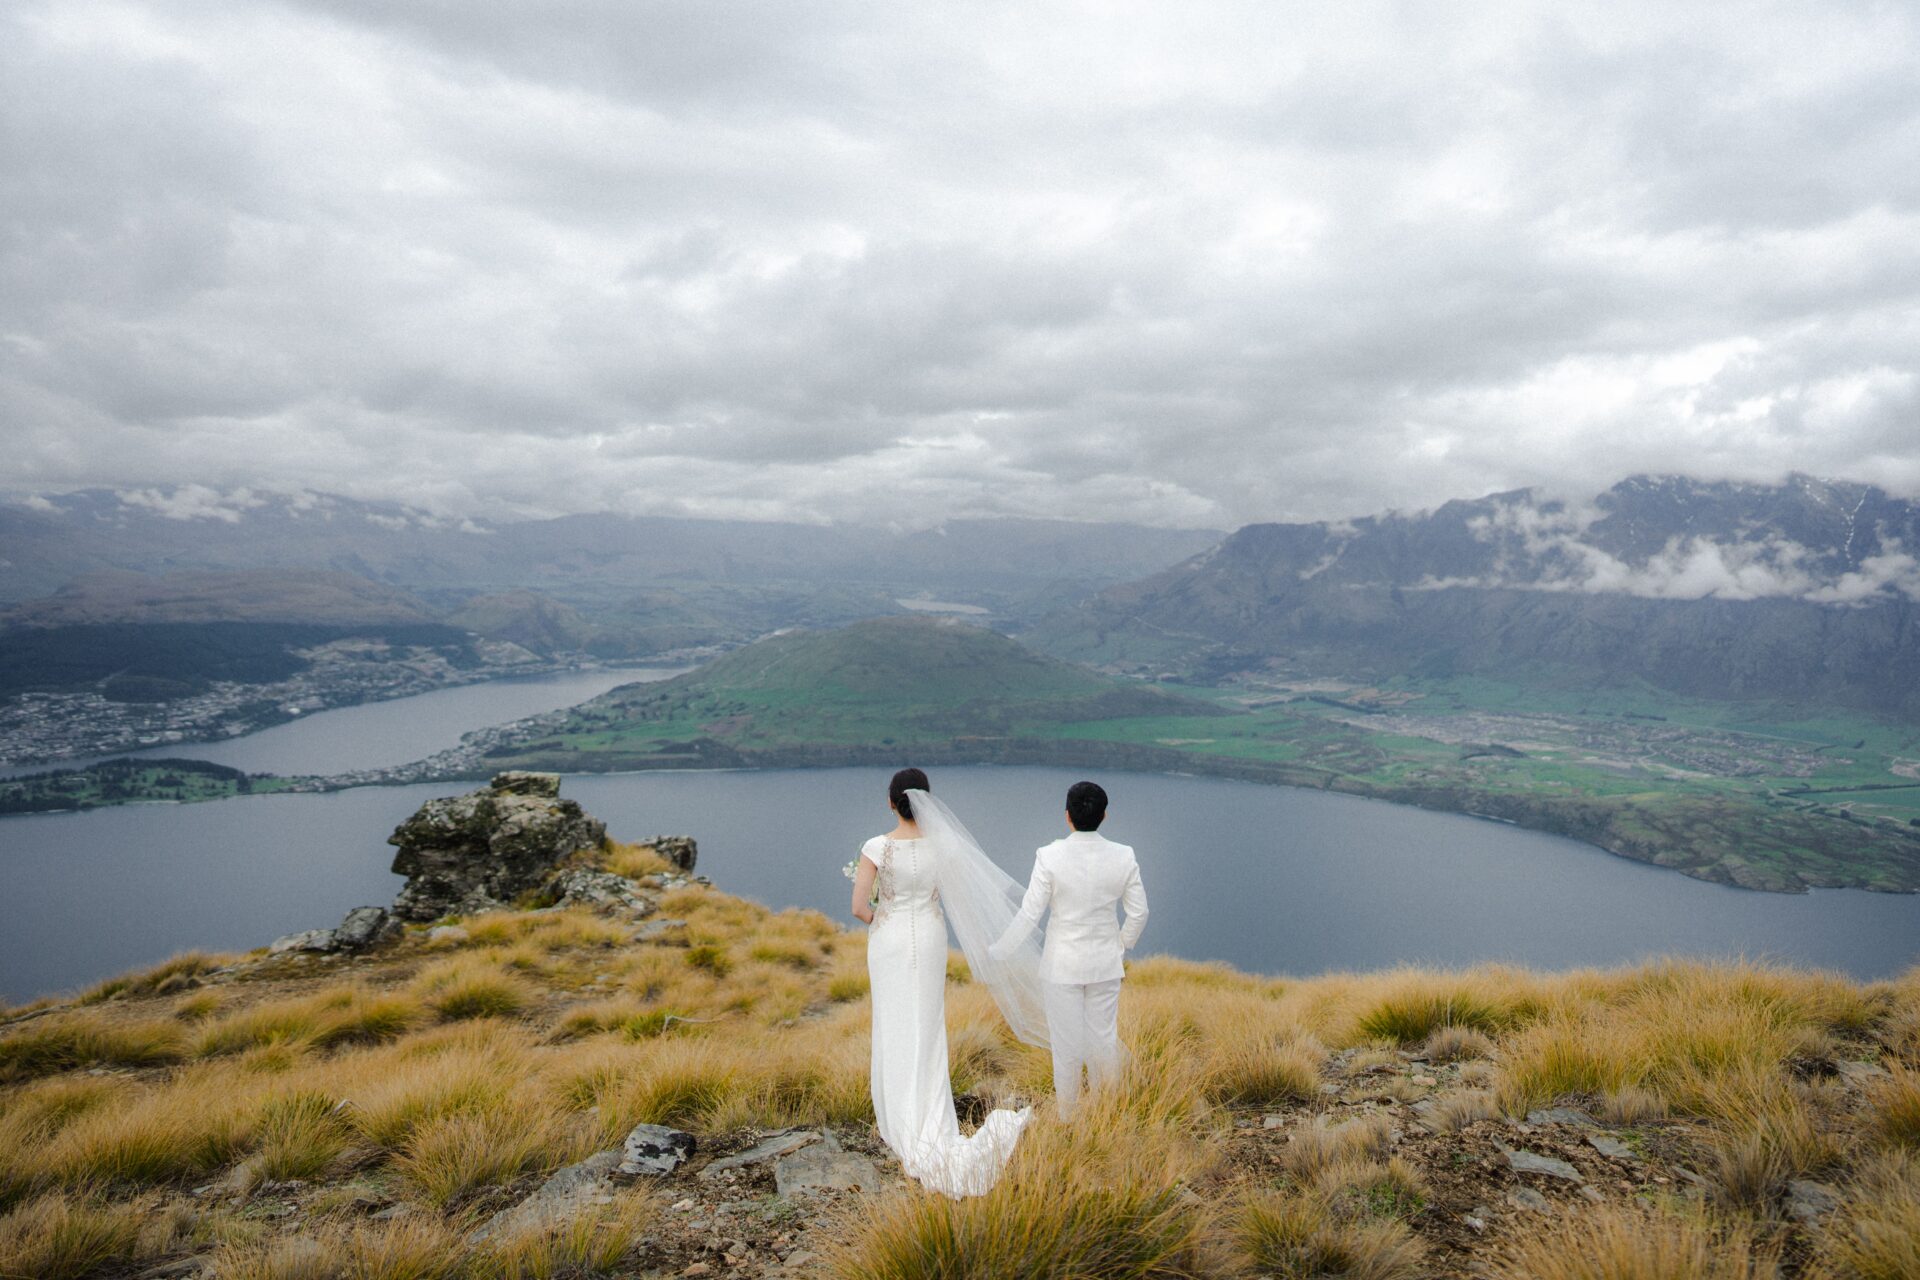 You want perfect photos from your New Zealand wedding day that will last forever